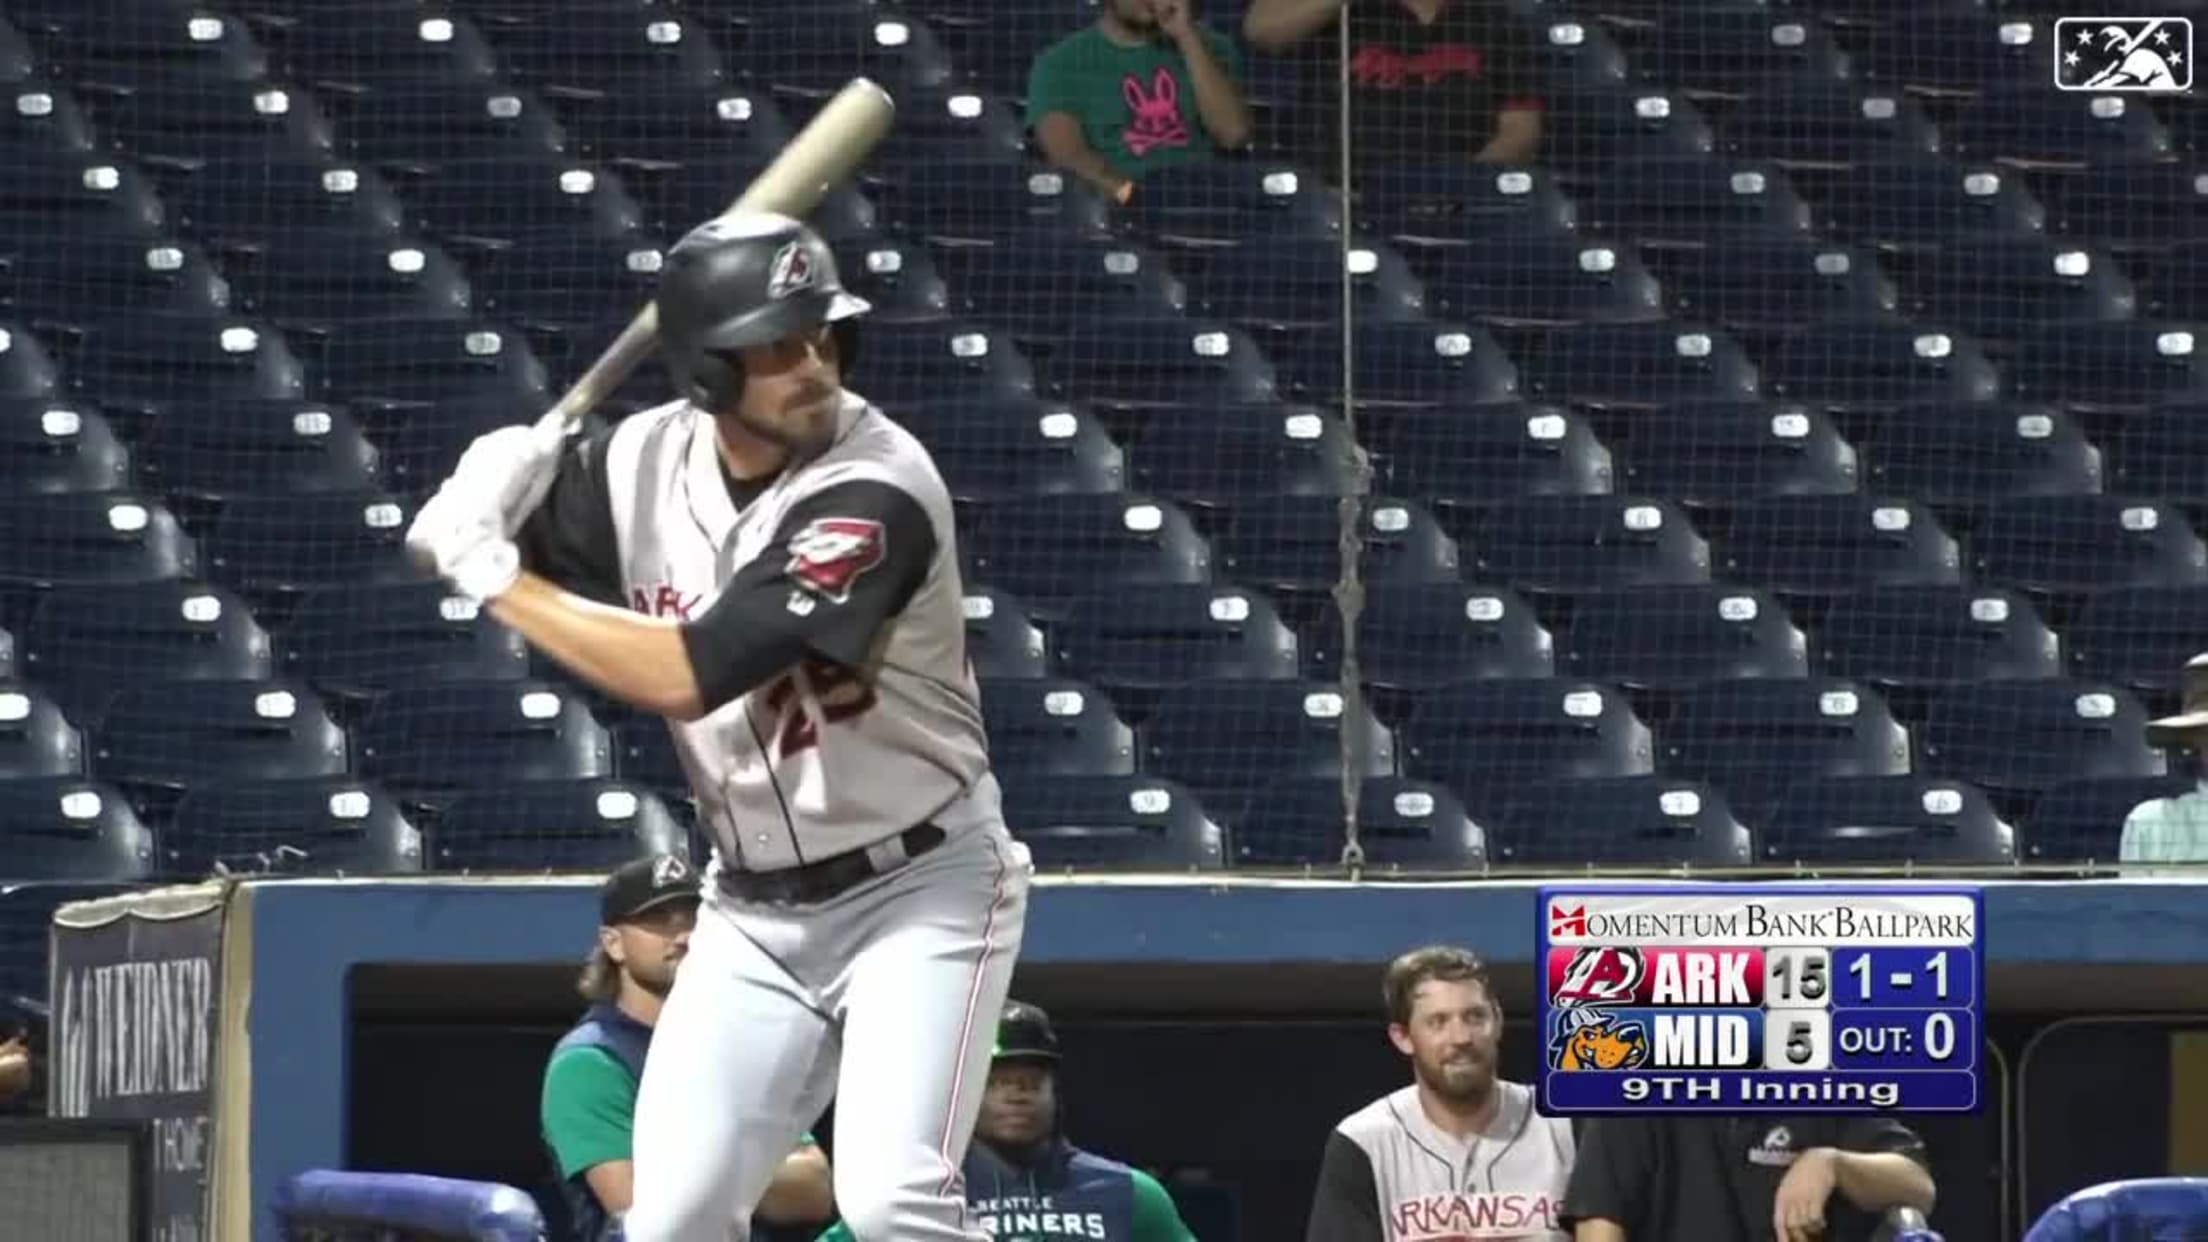 Pitcher Shipley homers, doubles